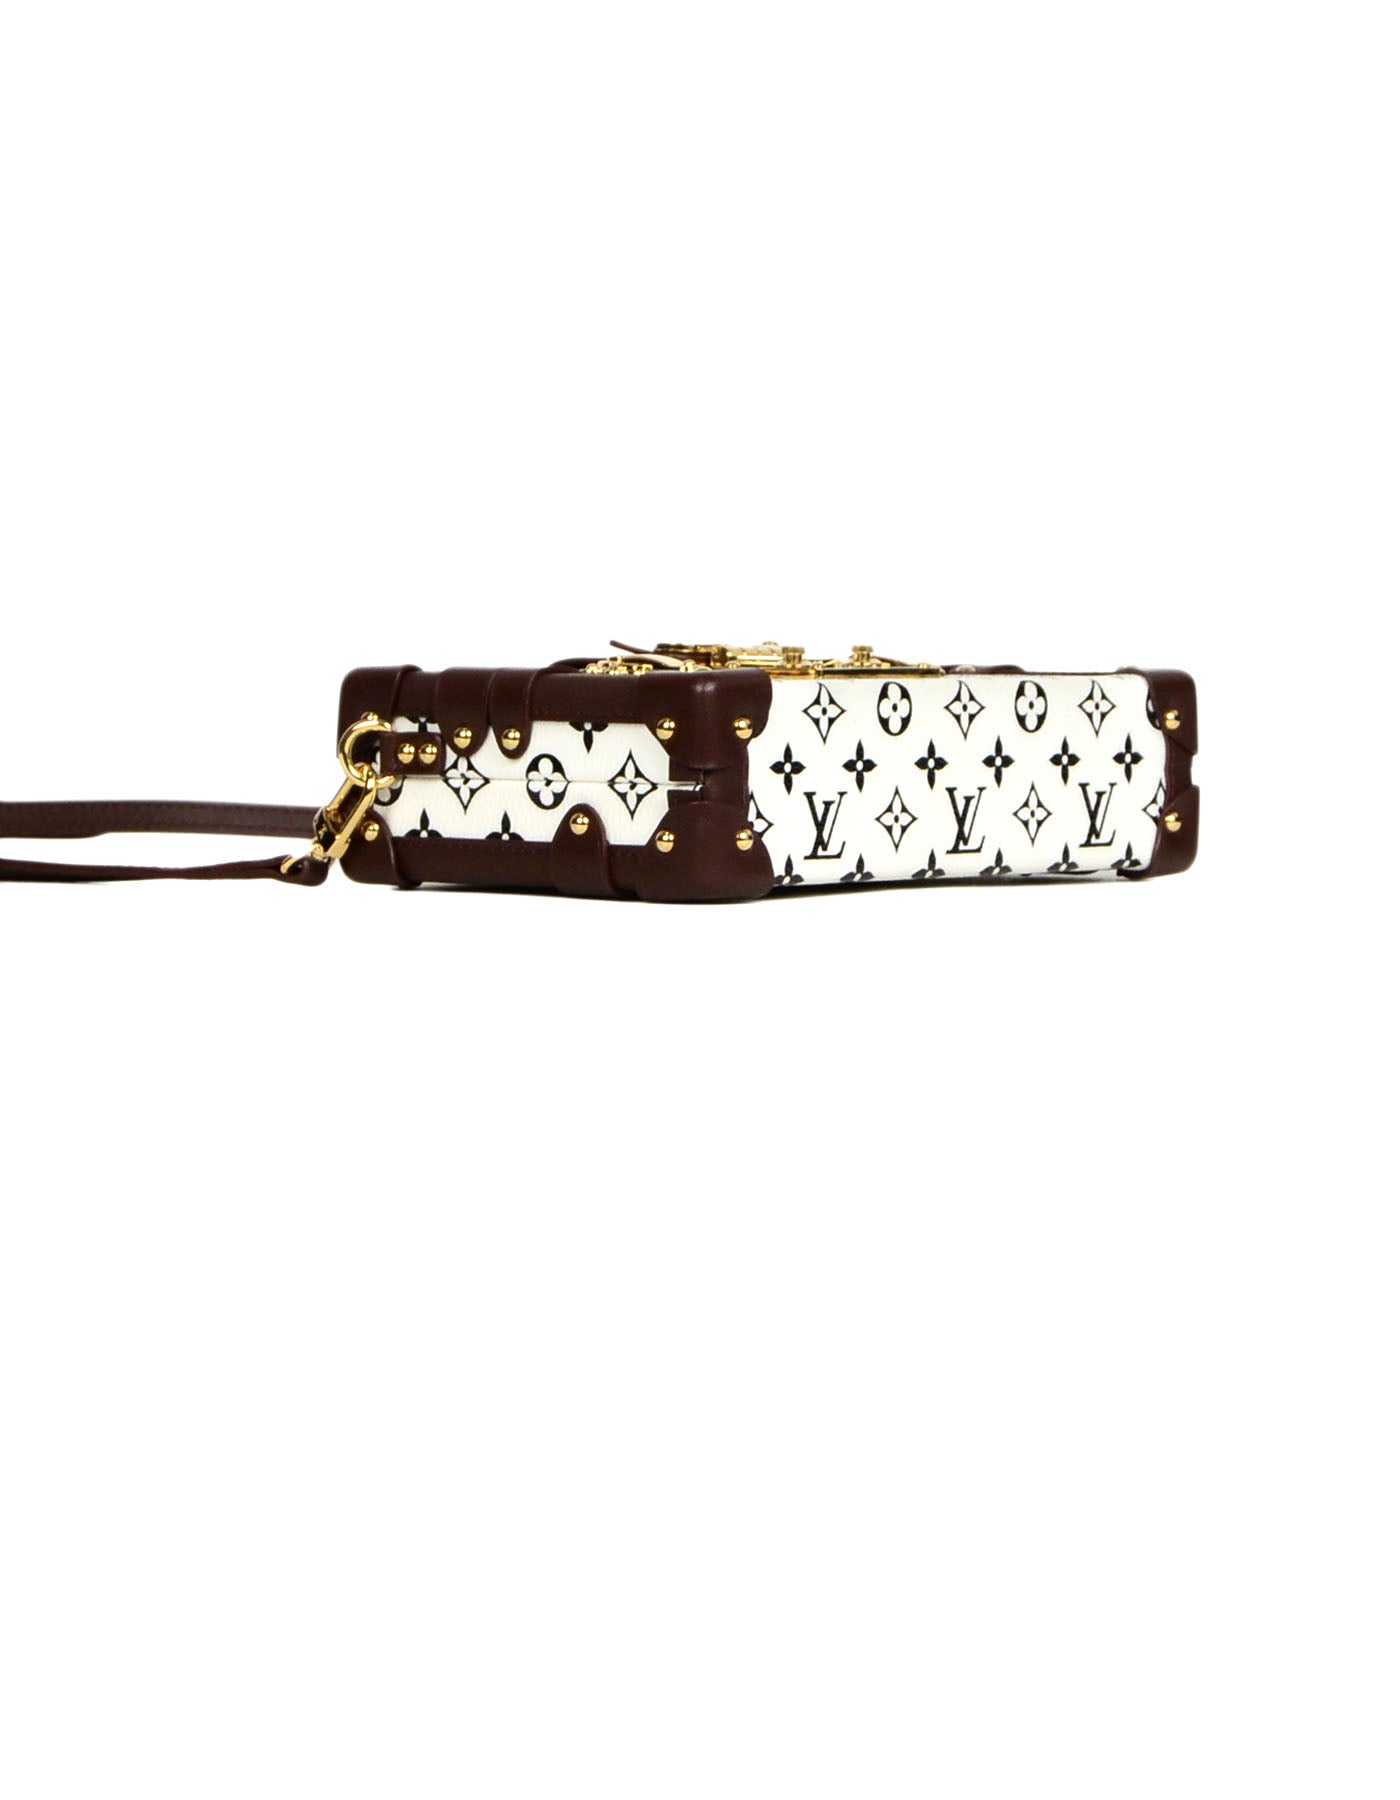 edit Louis Vuitton Limited Edition Black/White Monogram Petite Malle Trunk  Crossbody For Sale at 1stdibs